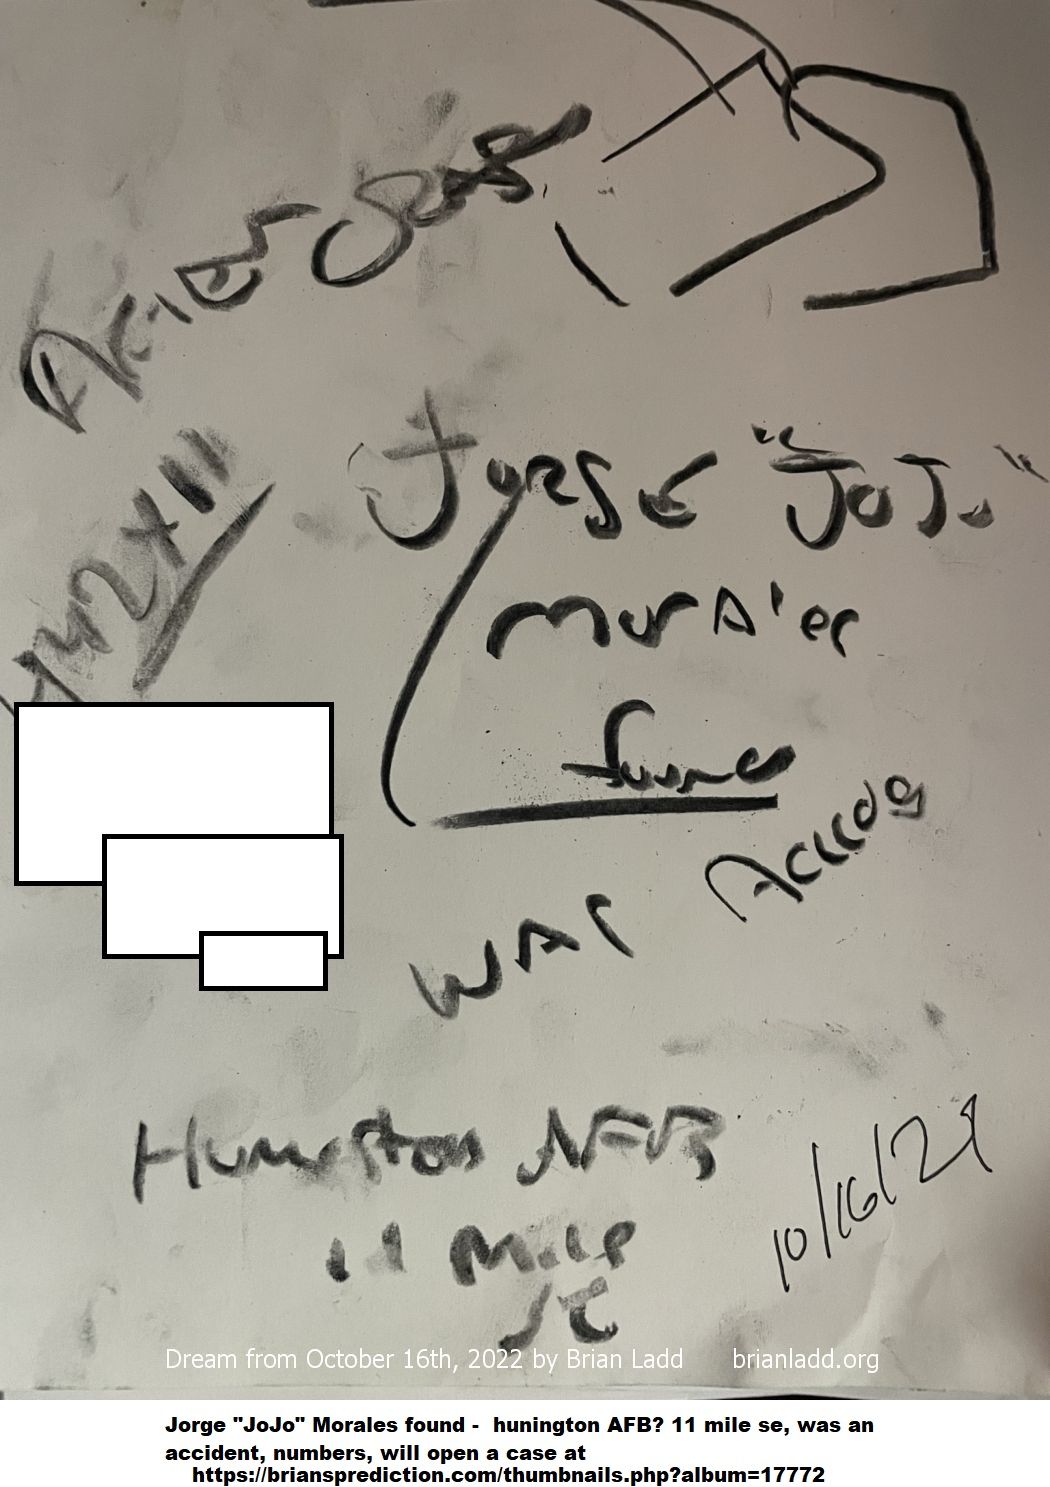 16 October 2022 1 Jorge "JoJo" Morales found - Huntington AFB? 11 mile se, was an accident, numbers...
Jorge "JoJo" Morales found - Huntington AFB? 11 mile se, was an accident, numbers, will open a case at   https://briansprediction.com/thumbnails.php?album=17772
